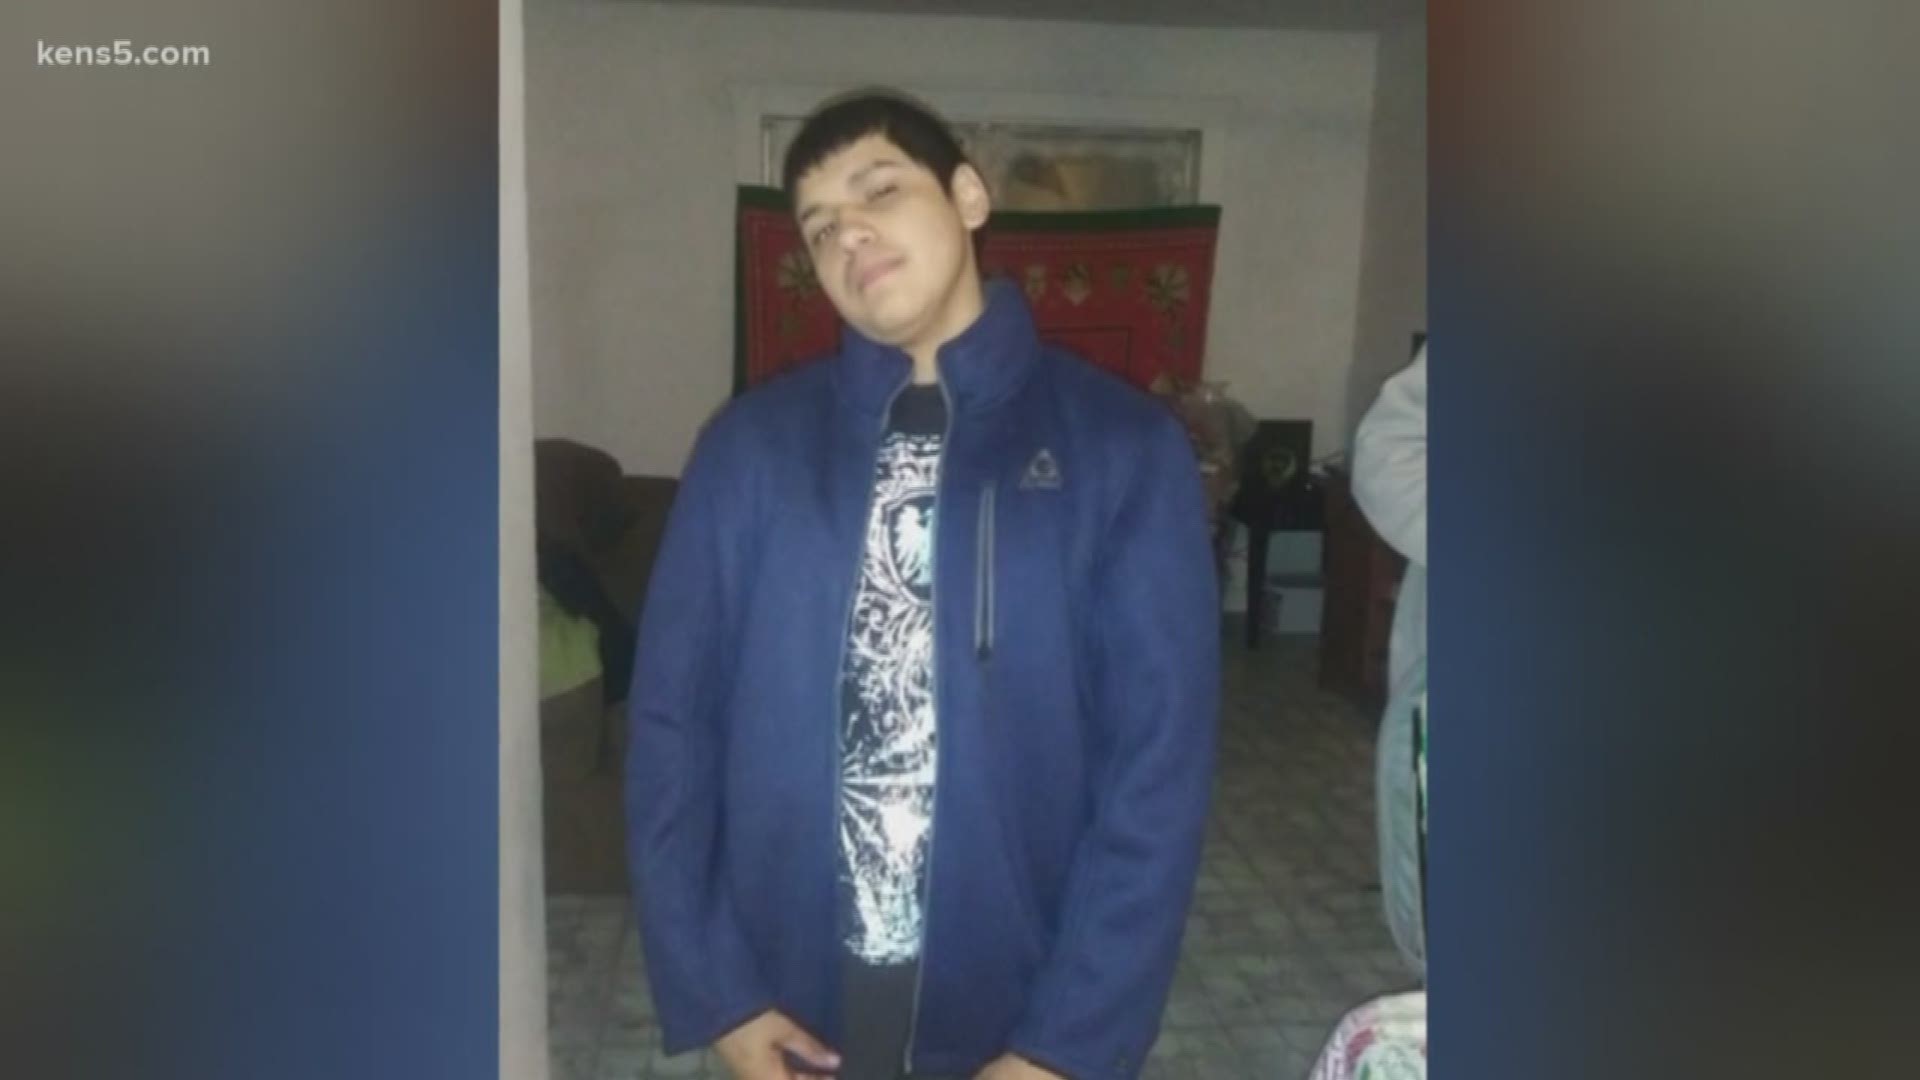 Friends and family of fourteen-year-old Jacob Rodriguez still have questions about the incident Sunday night that took his life.